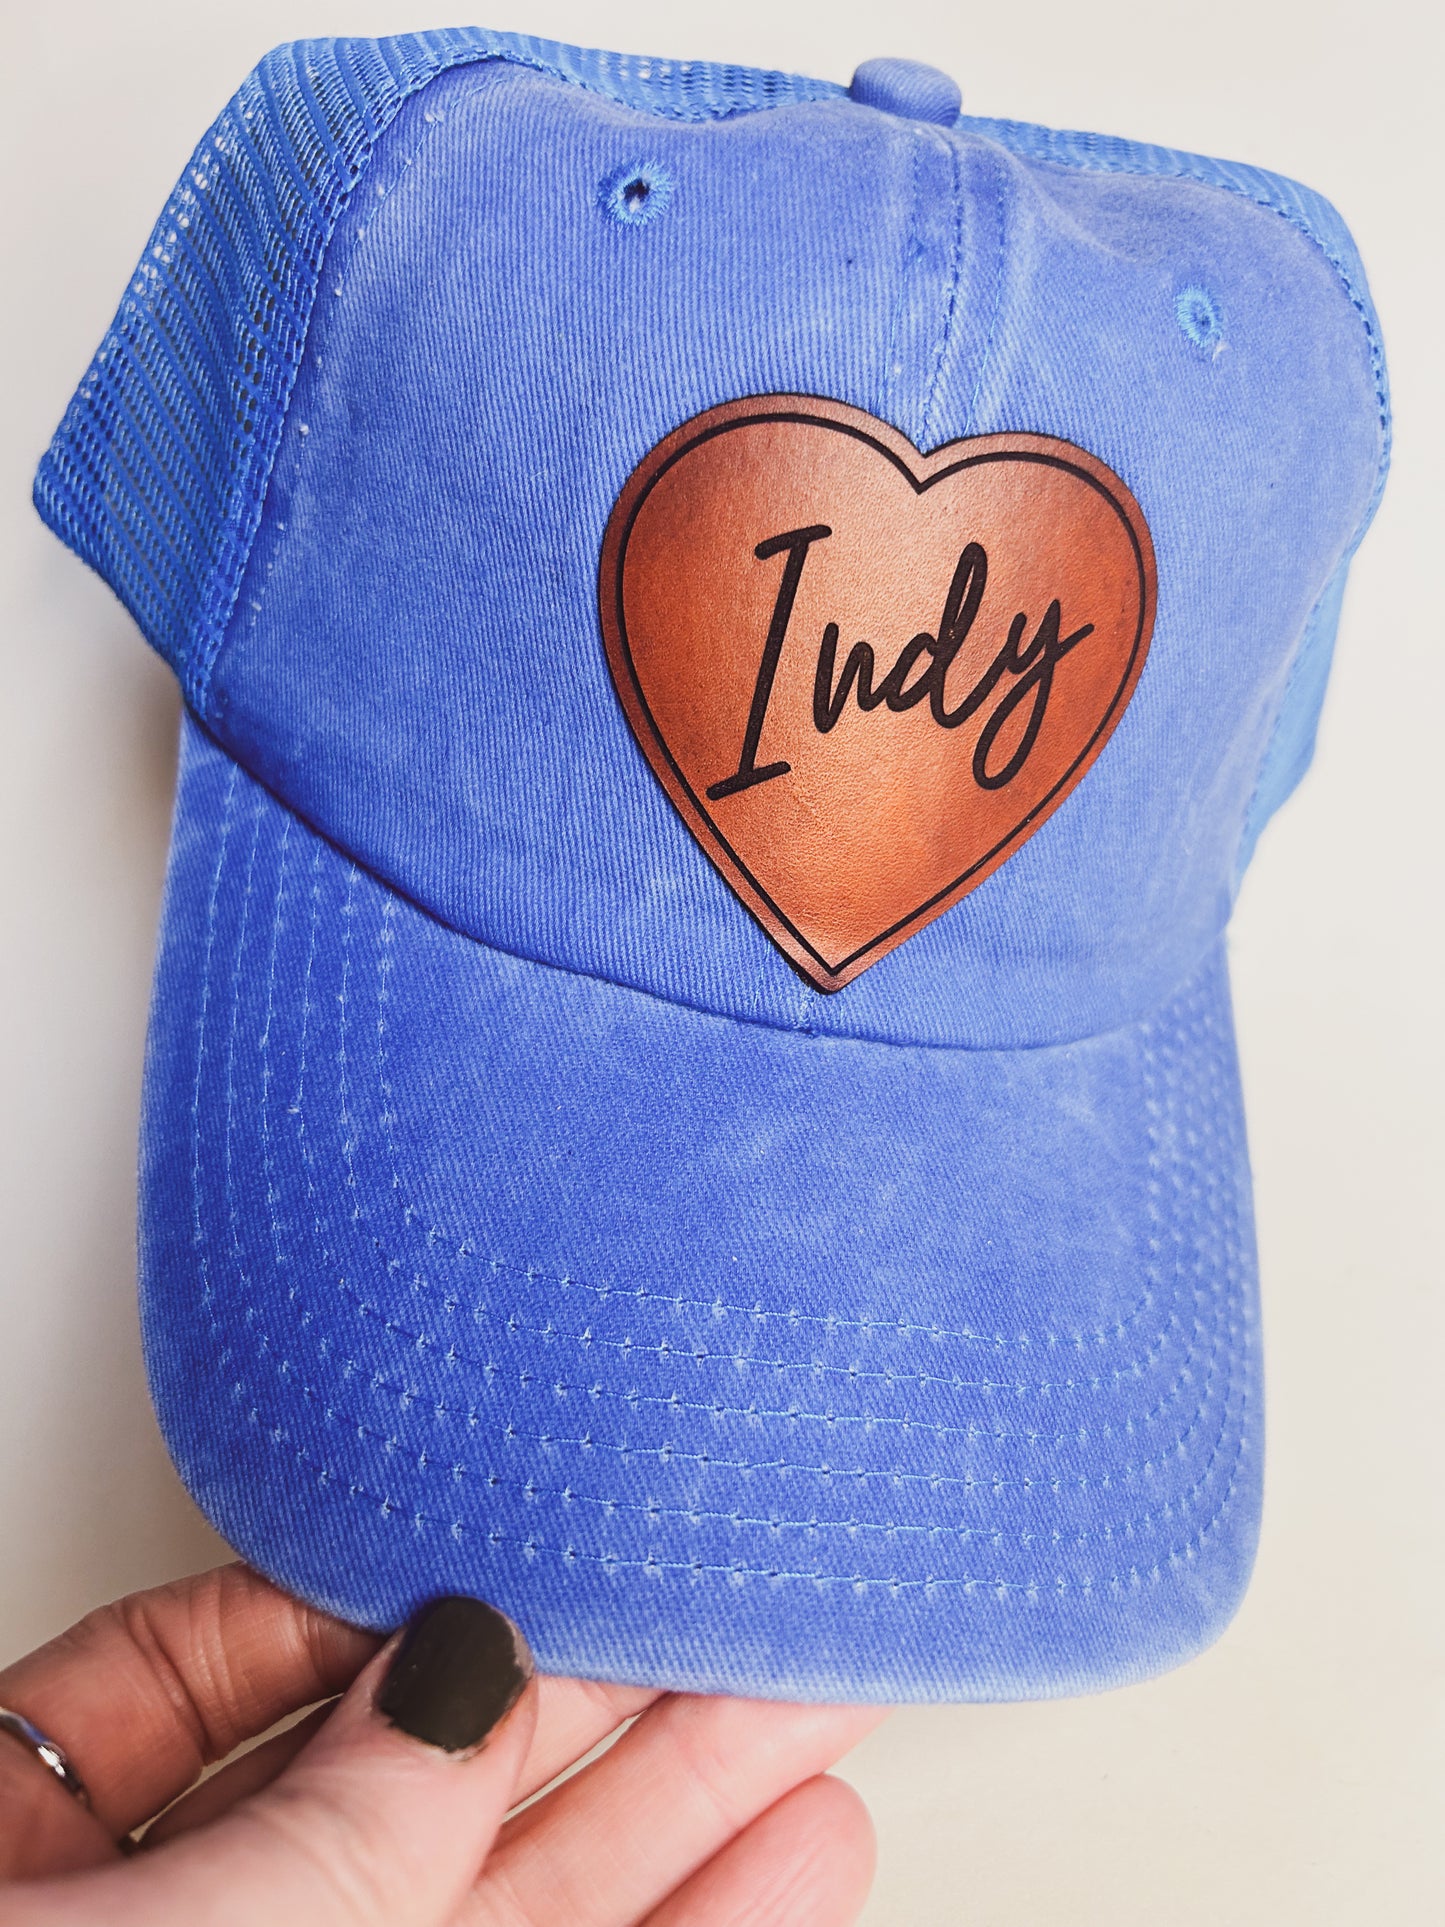 Indy Heart Patch on Blue Baseball Hat